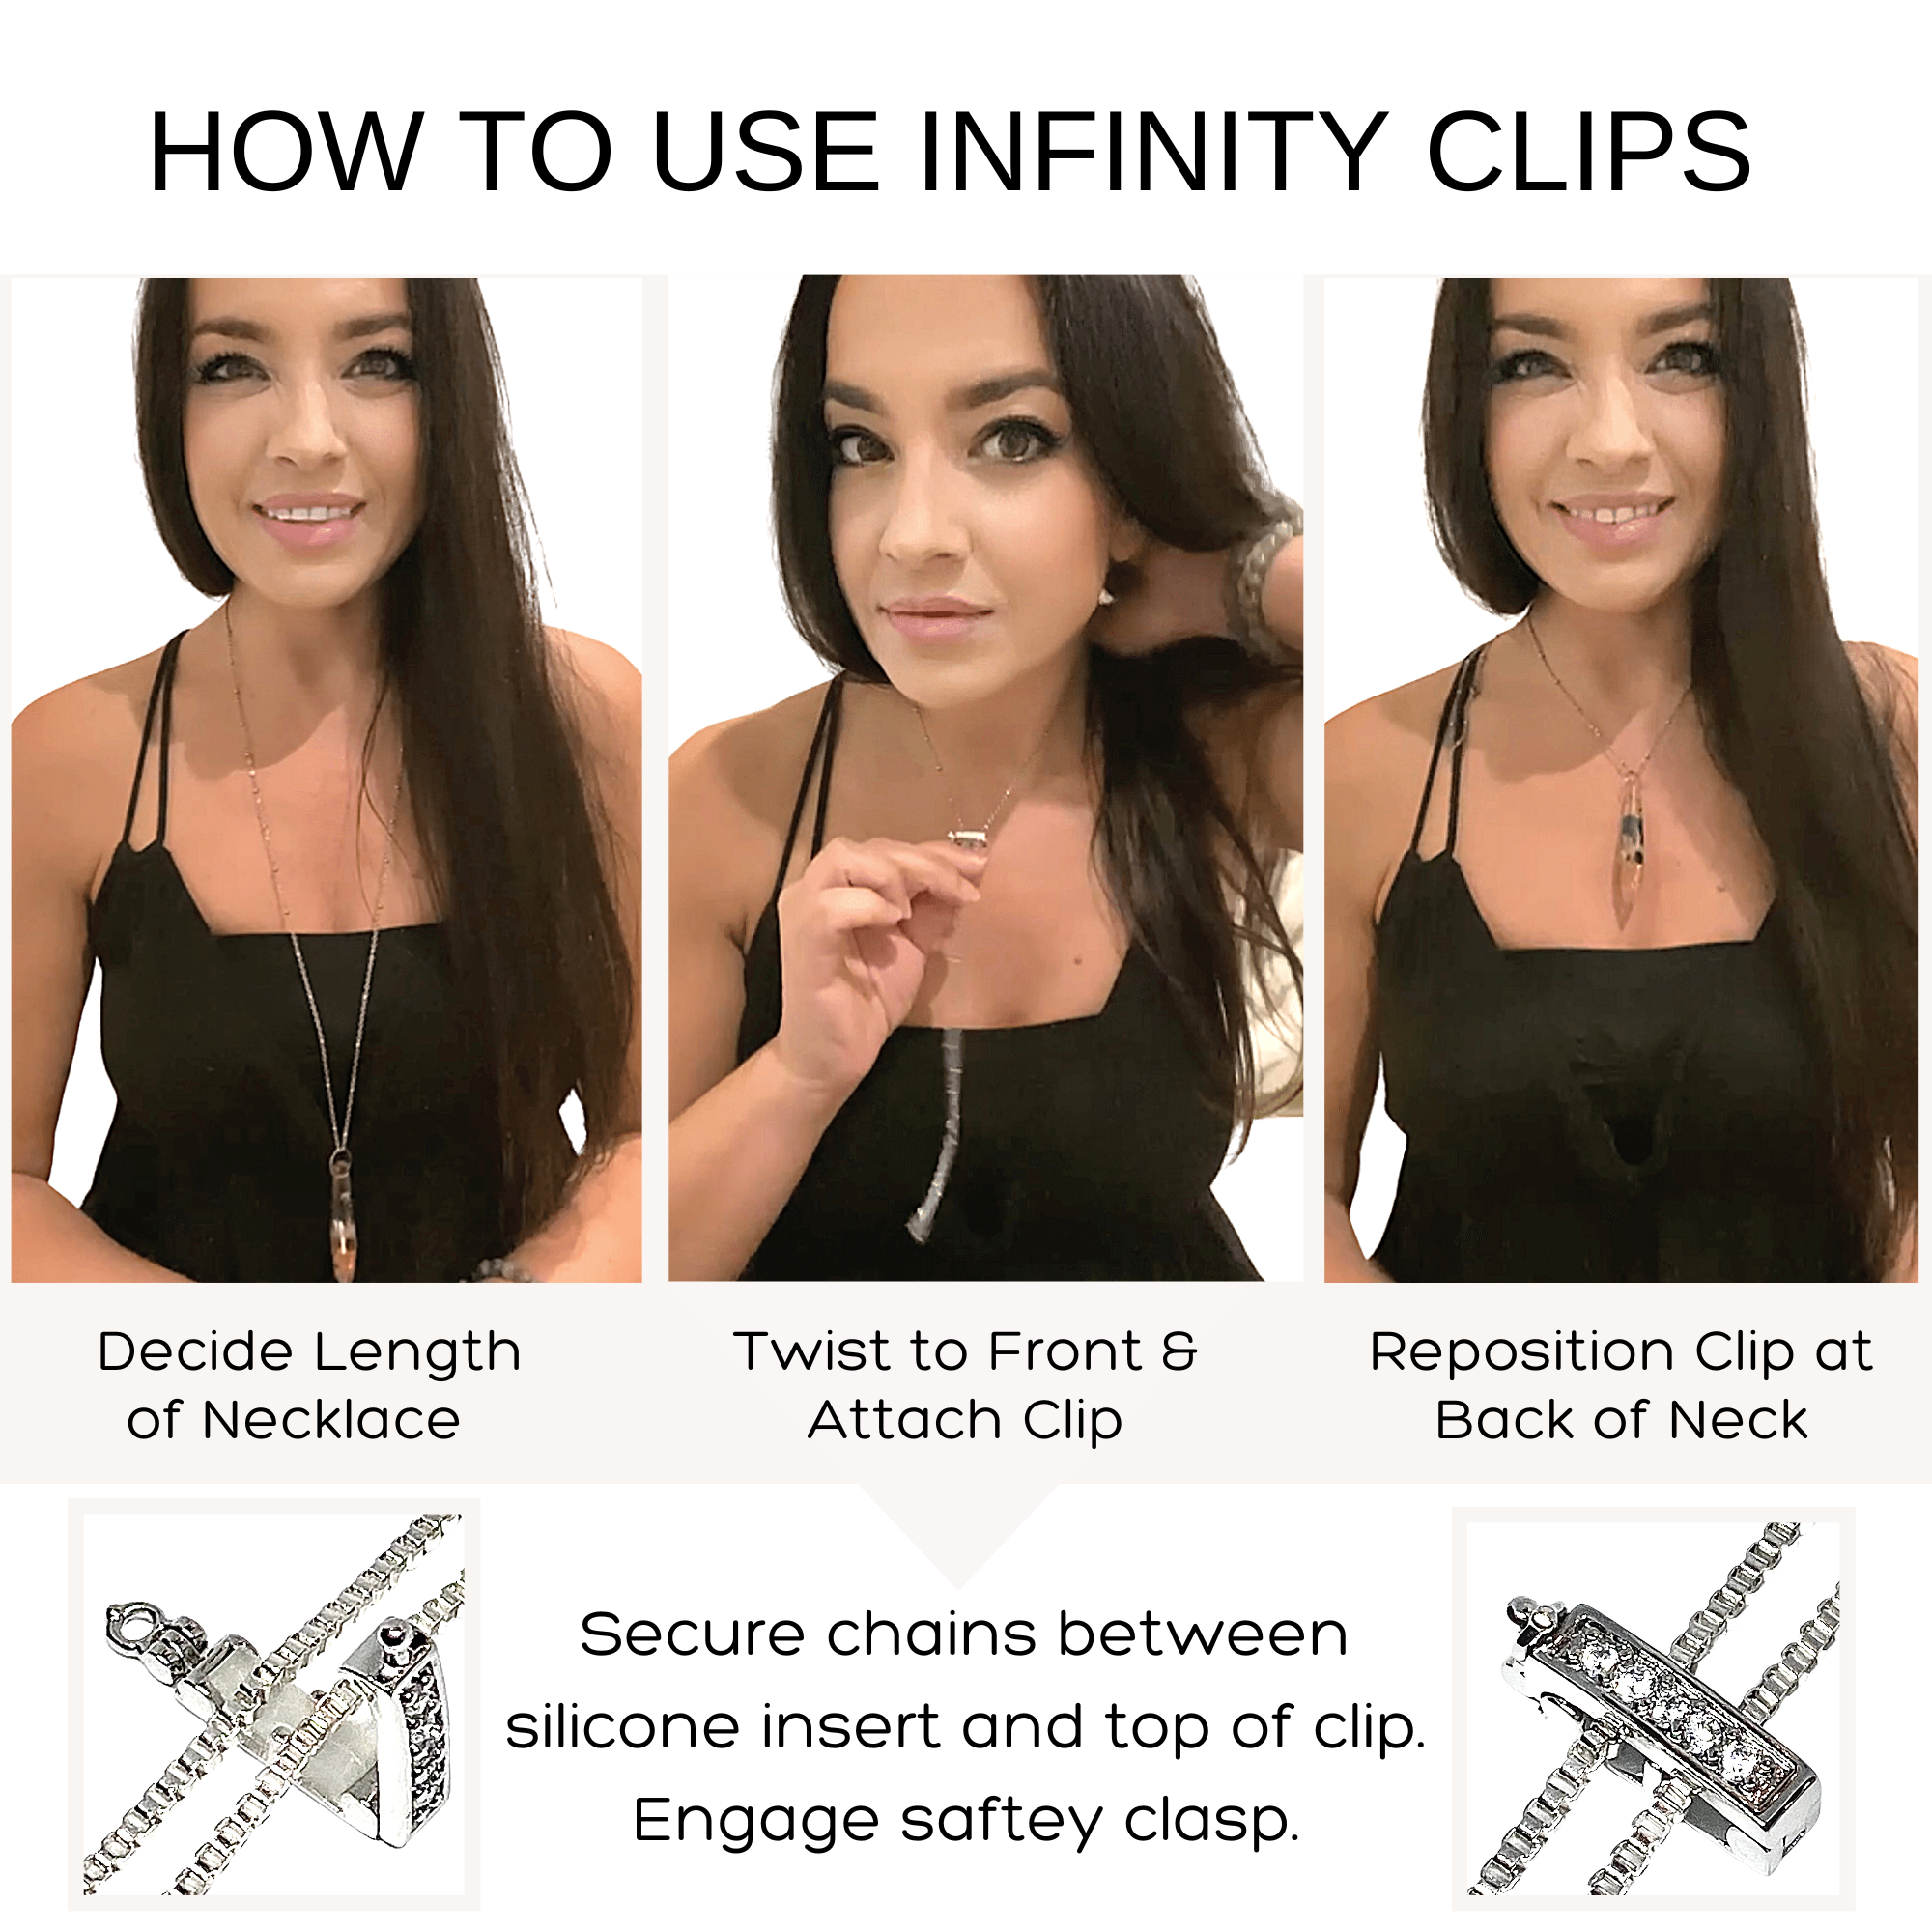 How to Shorten a Chain Necklace with Infinity Clips – Infinity Clips®